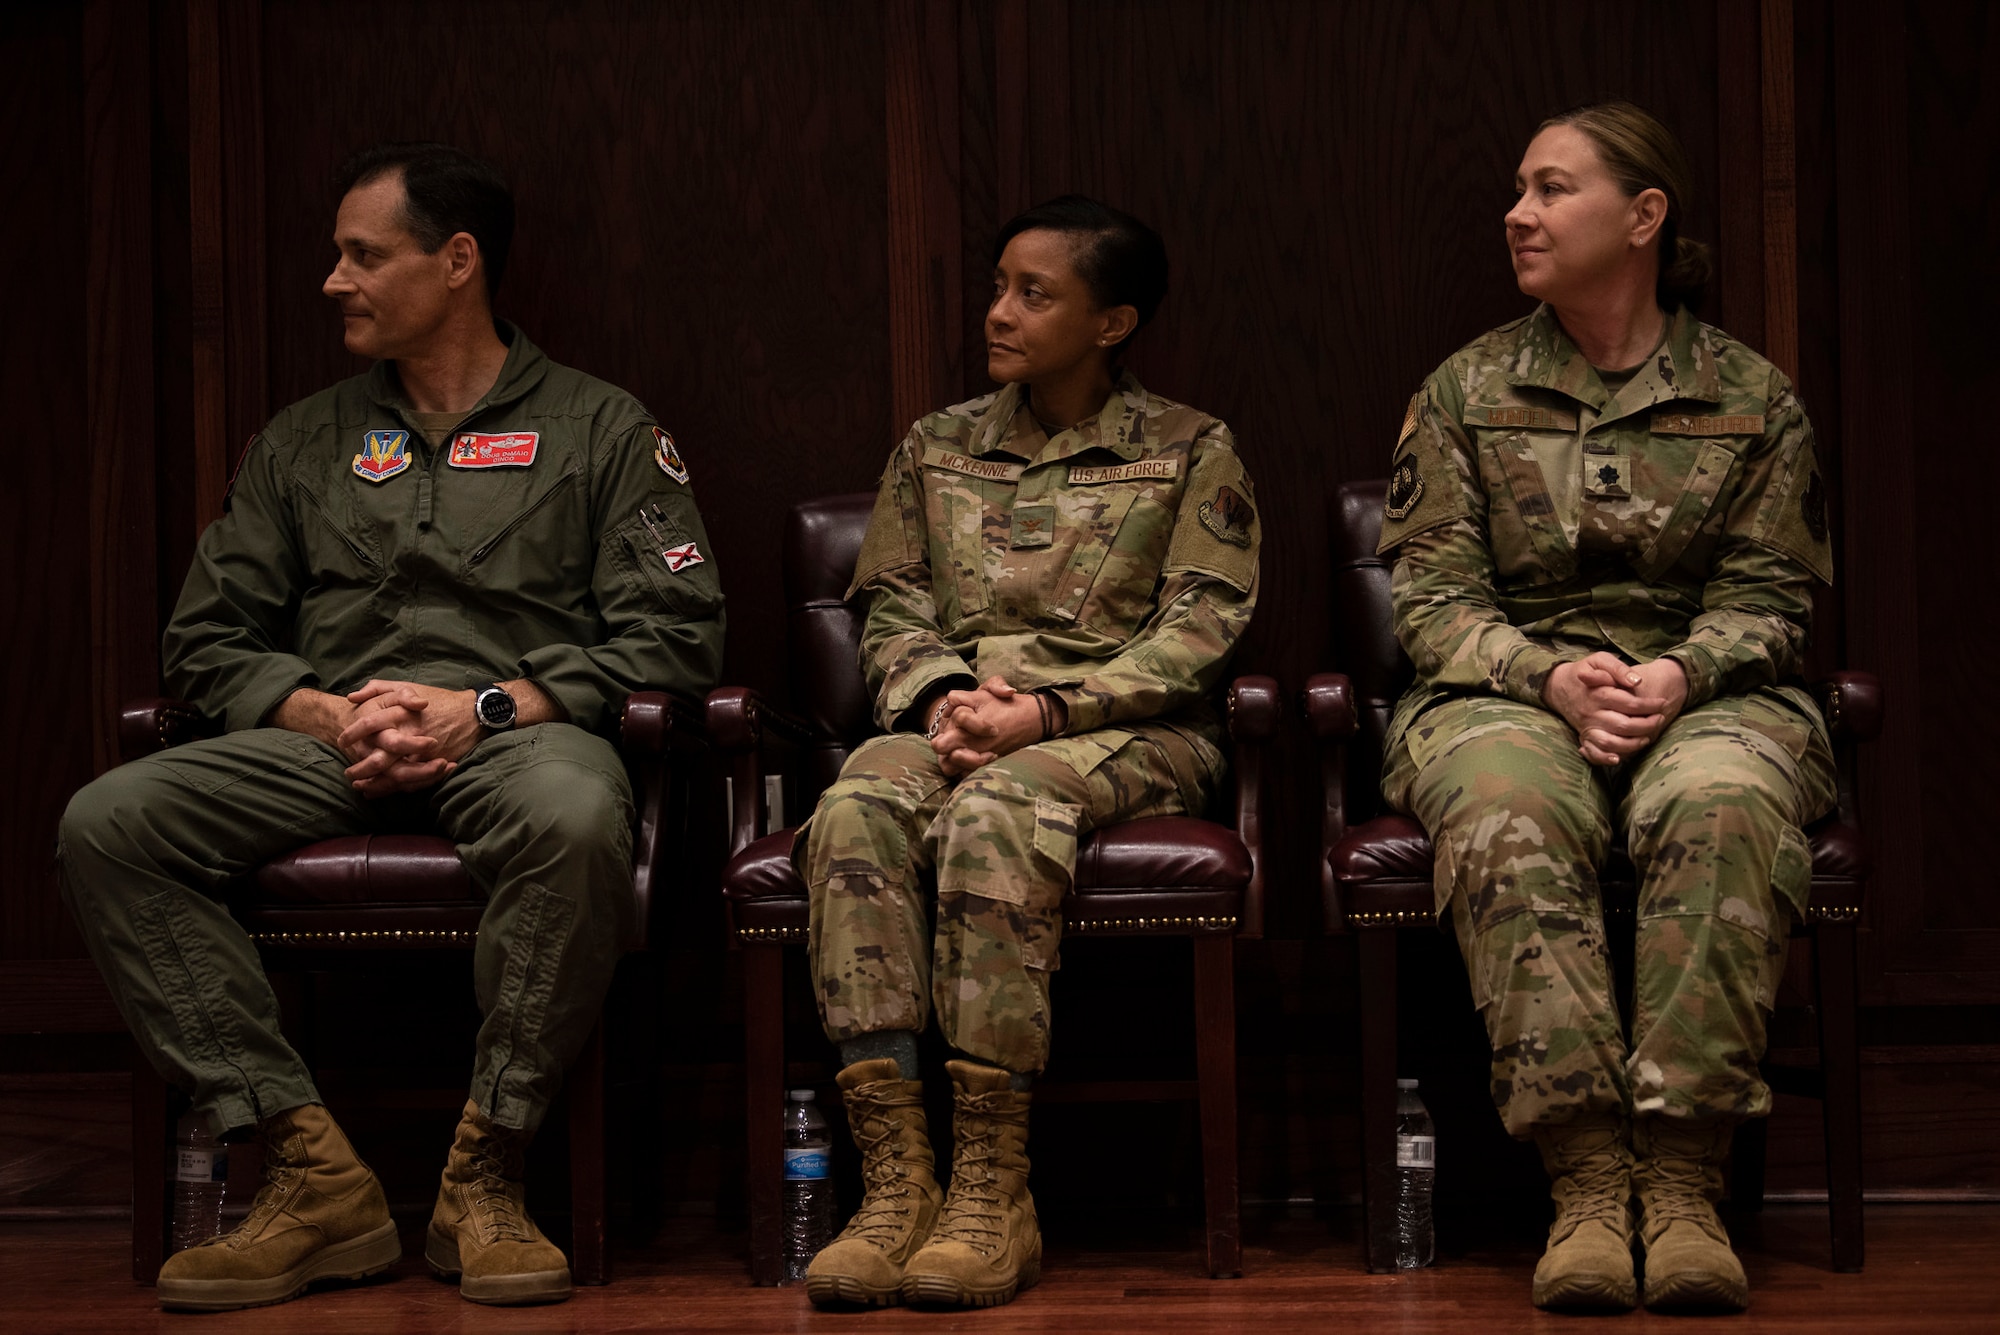 Col. DeMaio, Col. McKennie, and Lt. Col. Mundell sit during a medical group change of command ceremony.